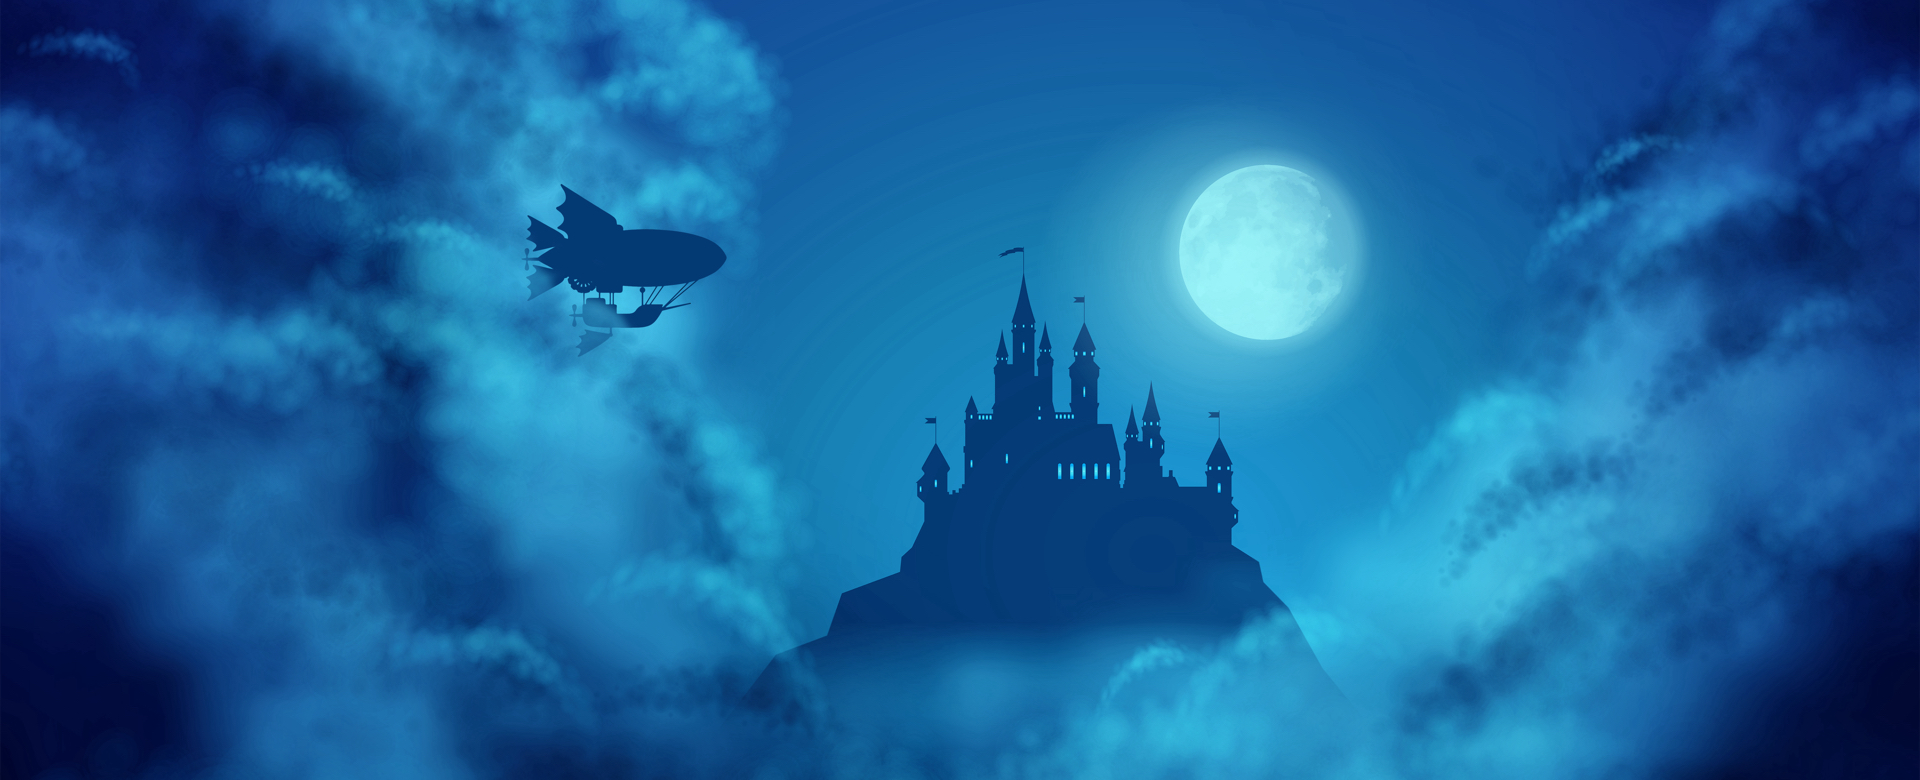 Airship emerges from clouds and approaches castle in a moonlit sky